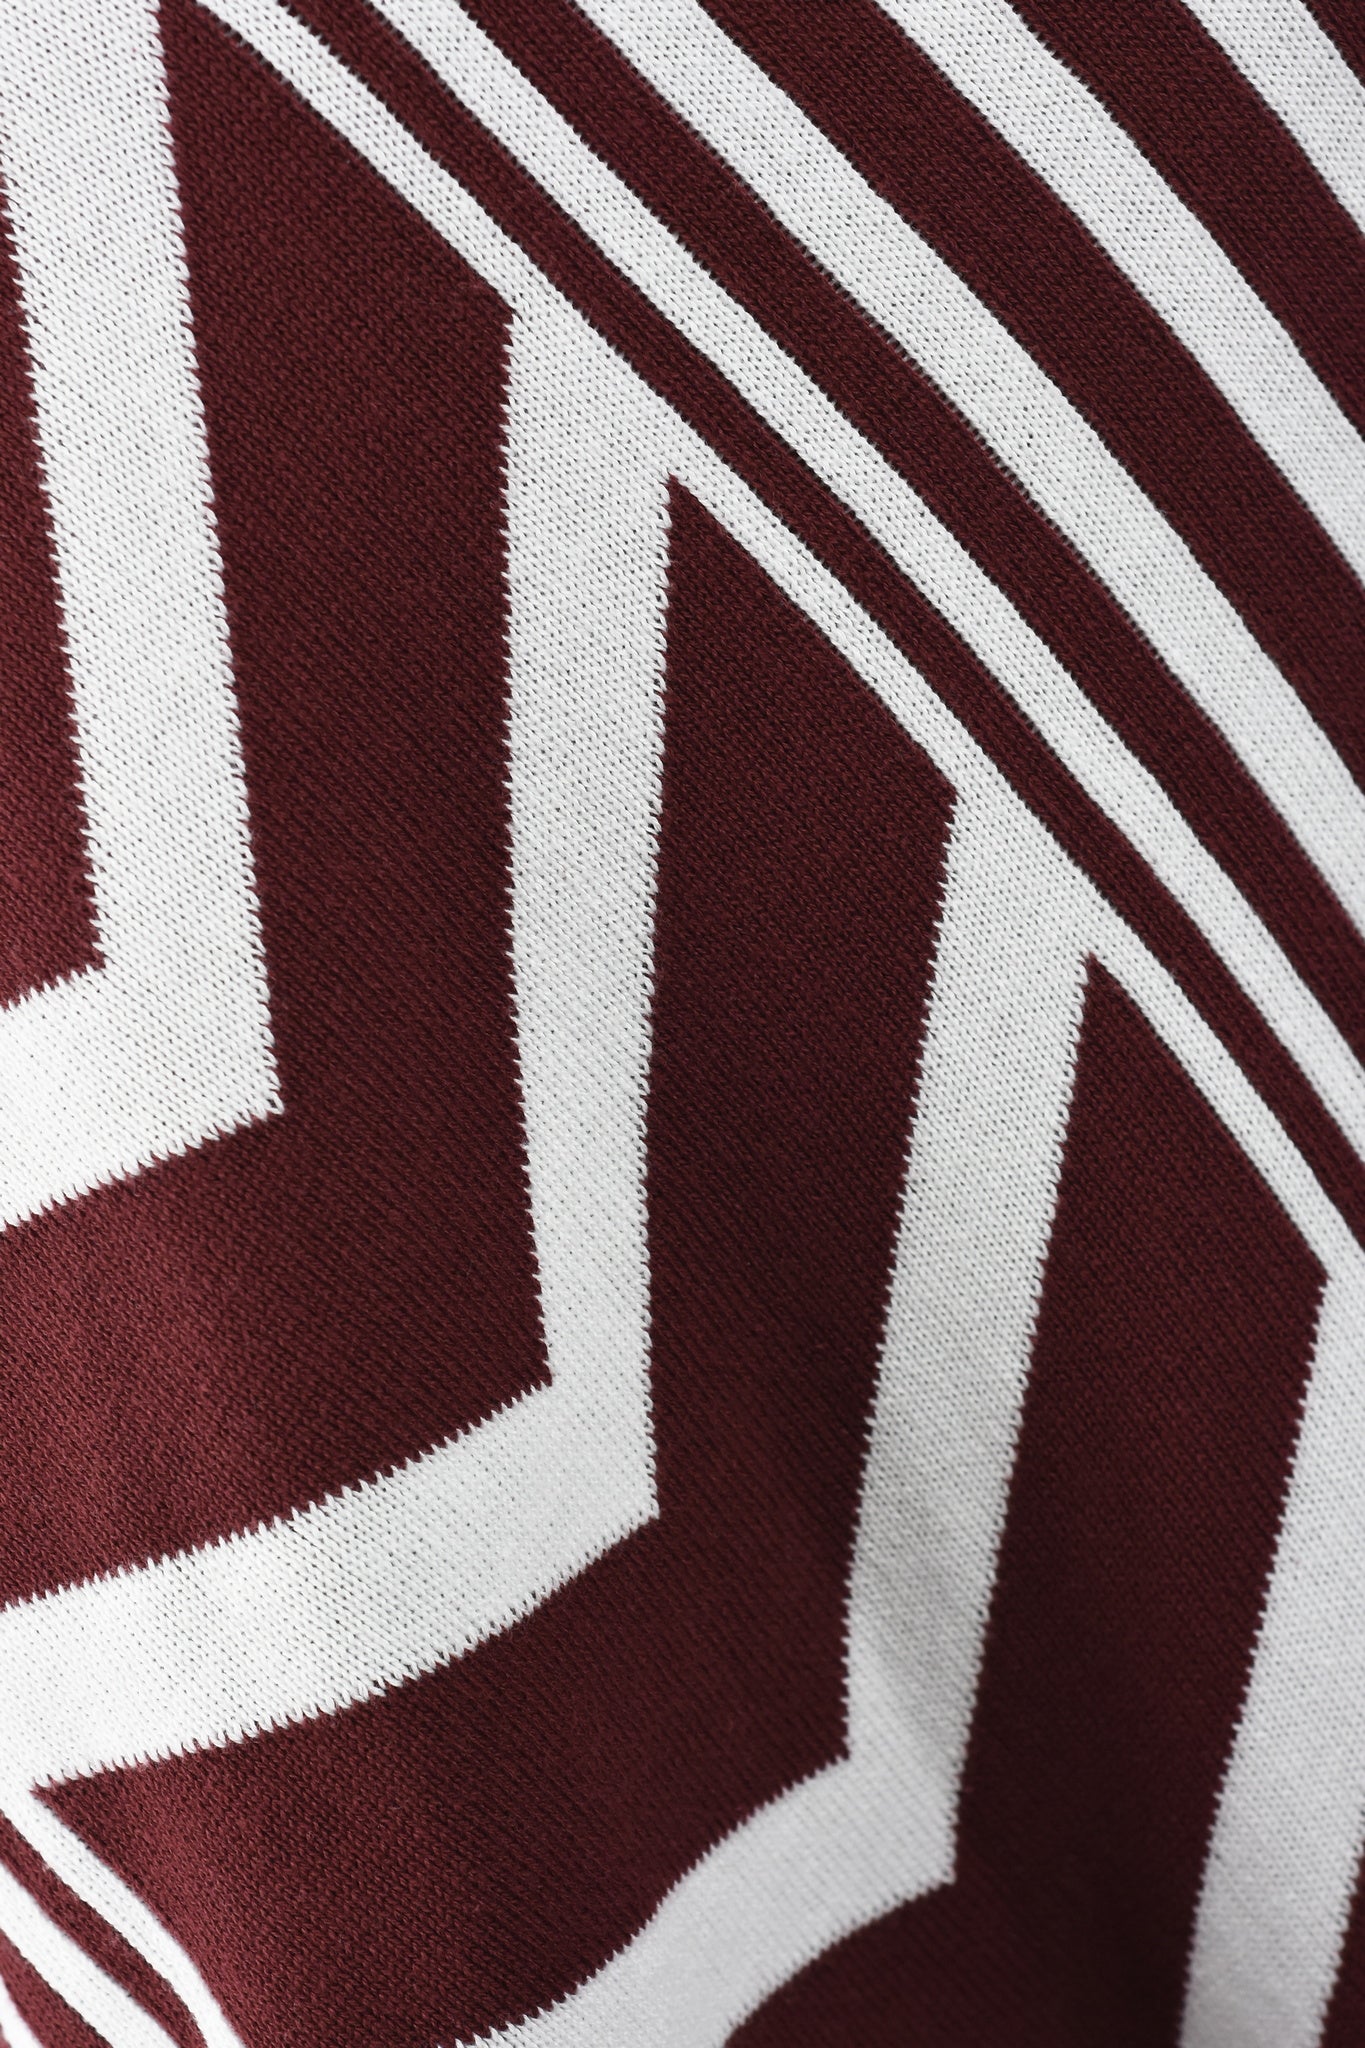 Menswear Knitted Zebra Poncho in Maroon and Off-white ZG5475